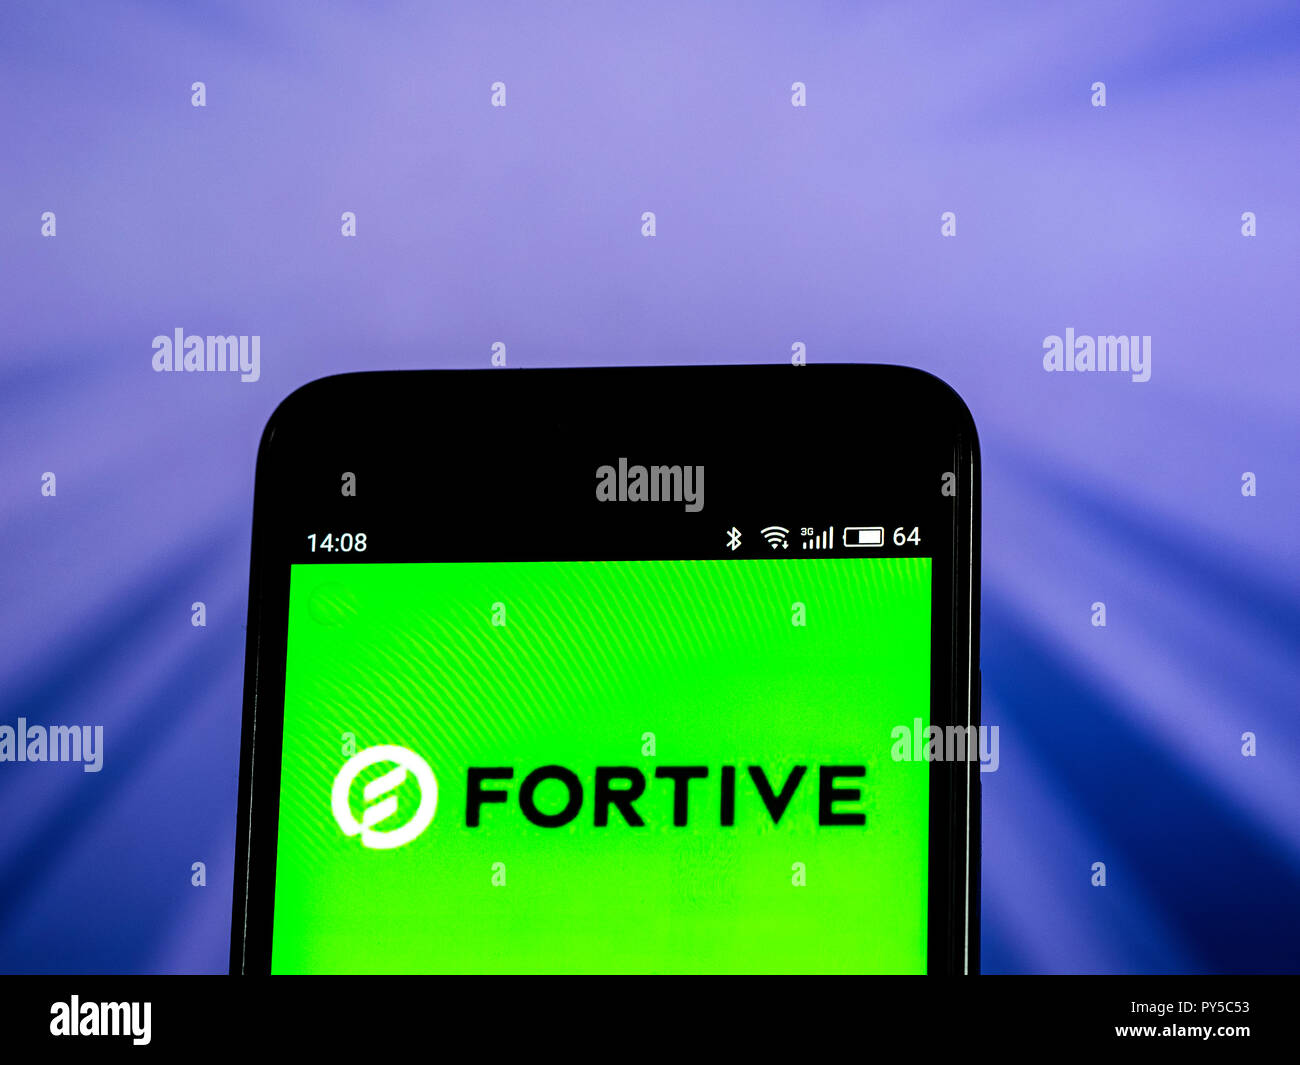 Fortive Industrial conglomerate company logo seen displayed on smart phone. Fortive is a diversified industrial conglomerate company. Stock Photo